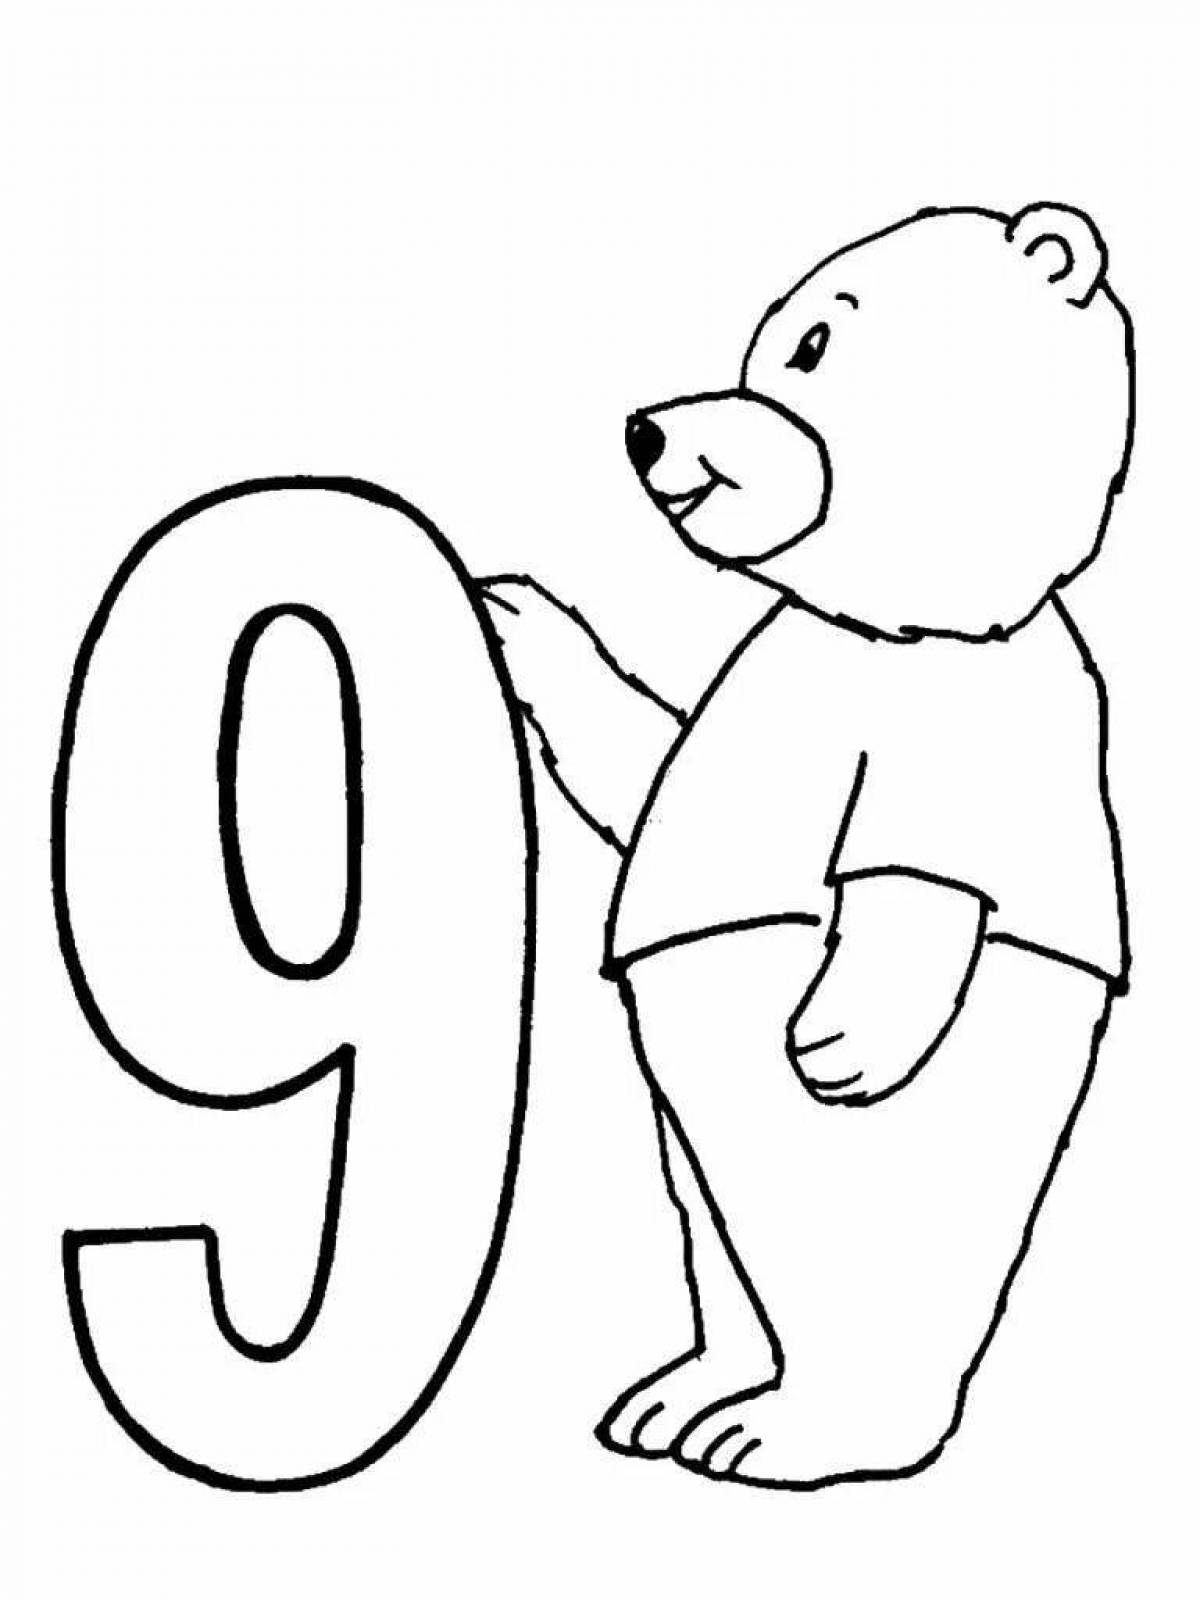 Colorful number 9 coloring pages for kids